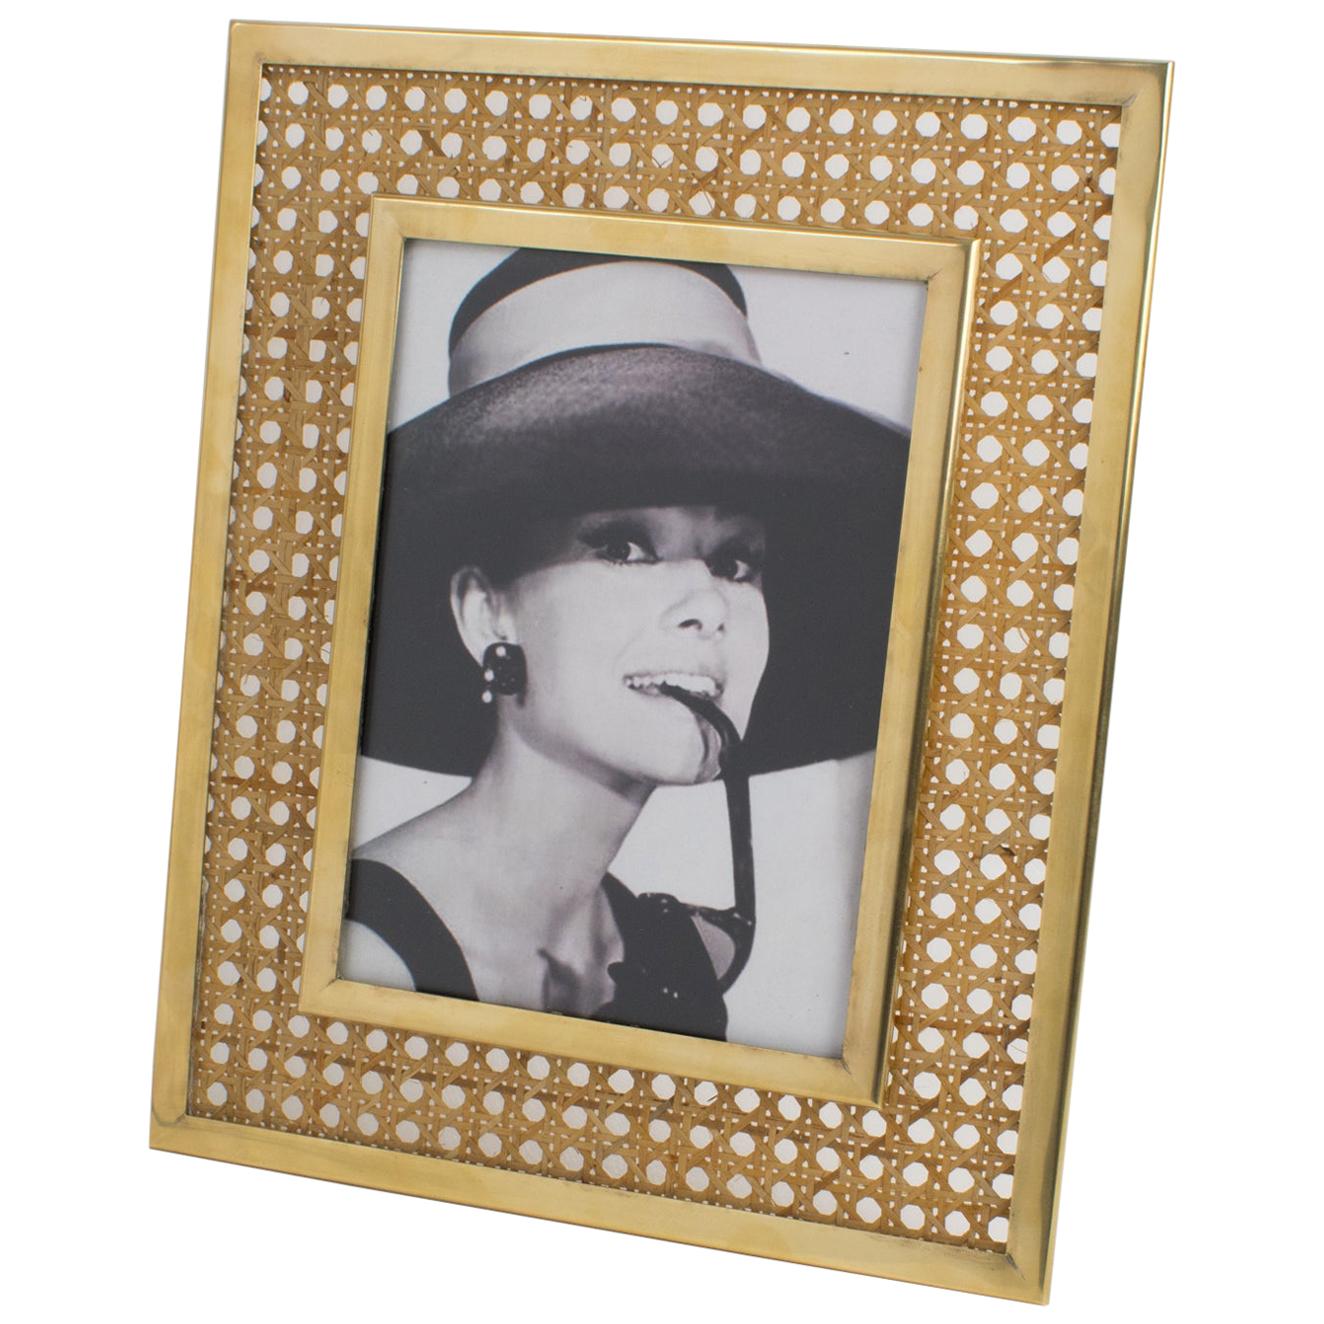 Elegant decorative picture photo frame, designed by Christian Dior for his Home collection in the 1970s. Crystal clear Lucite and rattan or wicker cane work. The rattan is embedded within two sheets of clear Lucite. Gilded brass framing around the